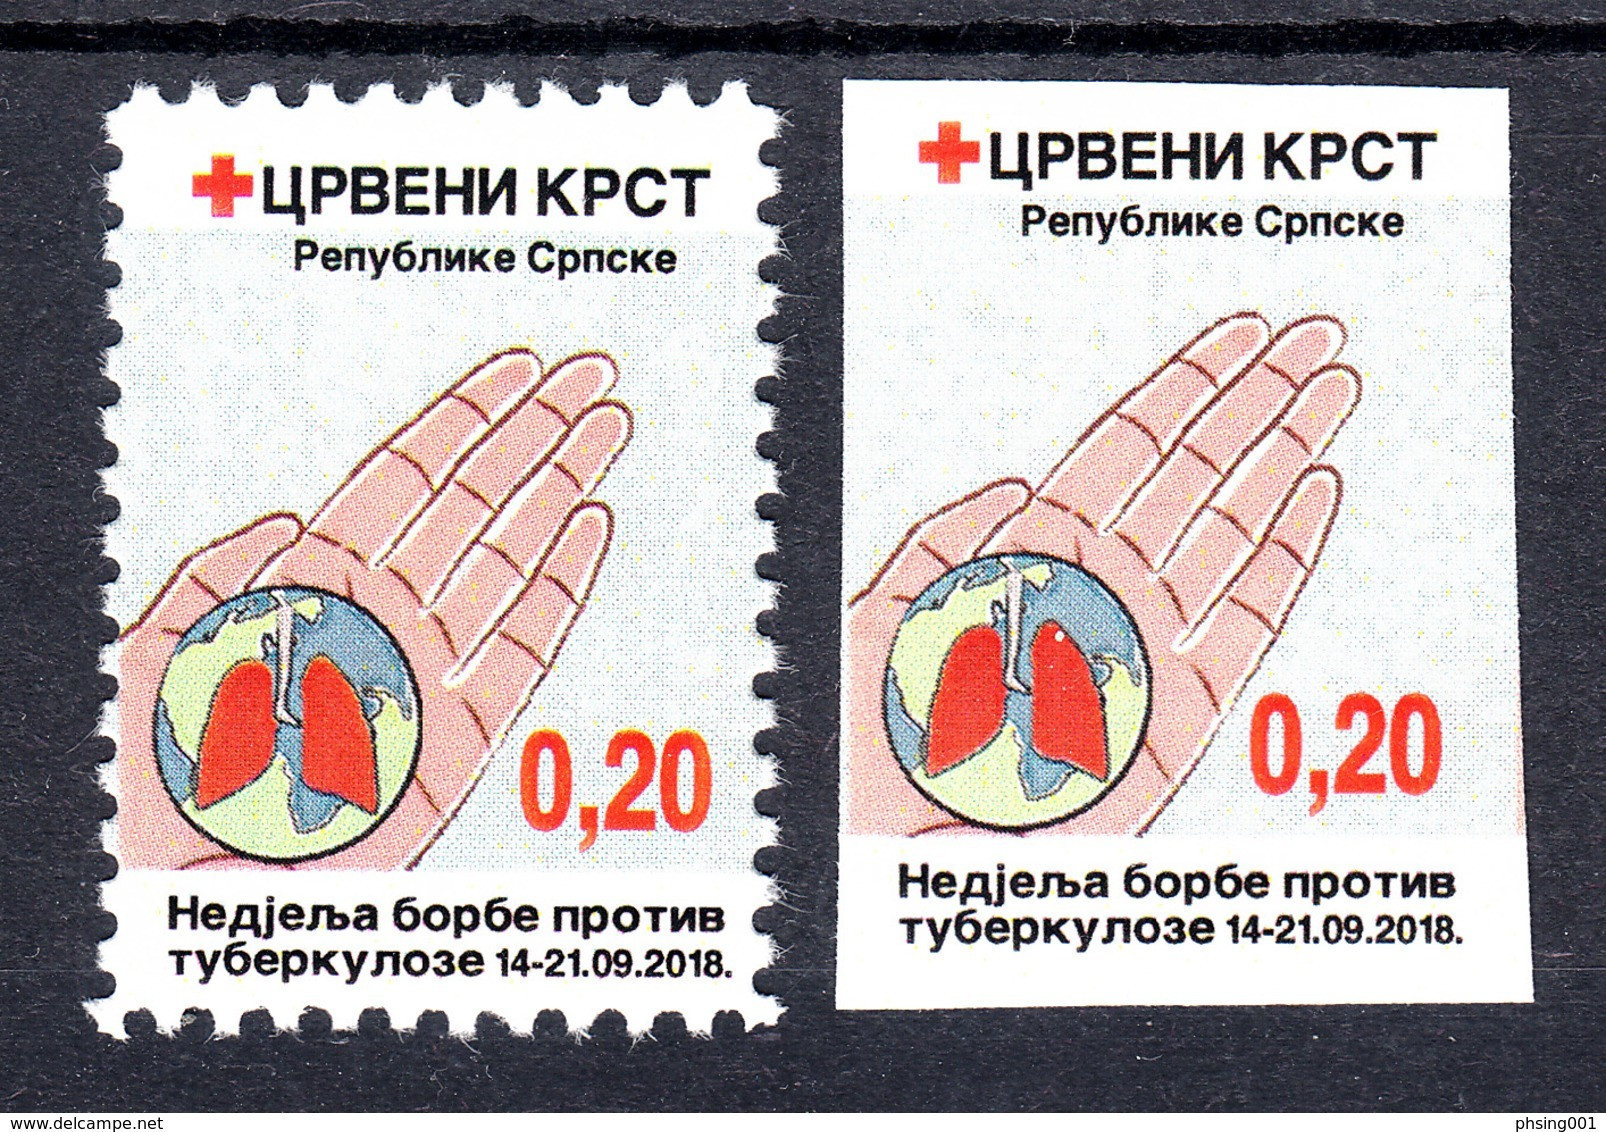 Bosnia Serbia 2018 TBC Red Cross Croix Rouge Rotes Kreuz, Tax Charity Surcharge, Perforated + Imperforated Stamp MNH - Rotes Kreuz